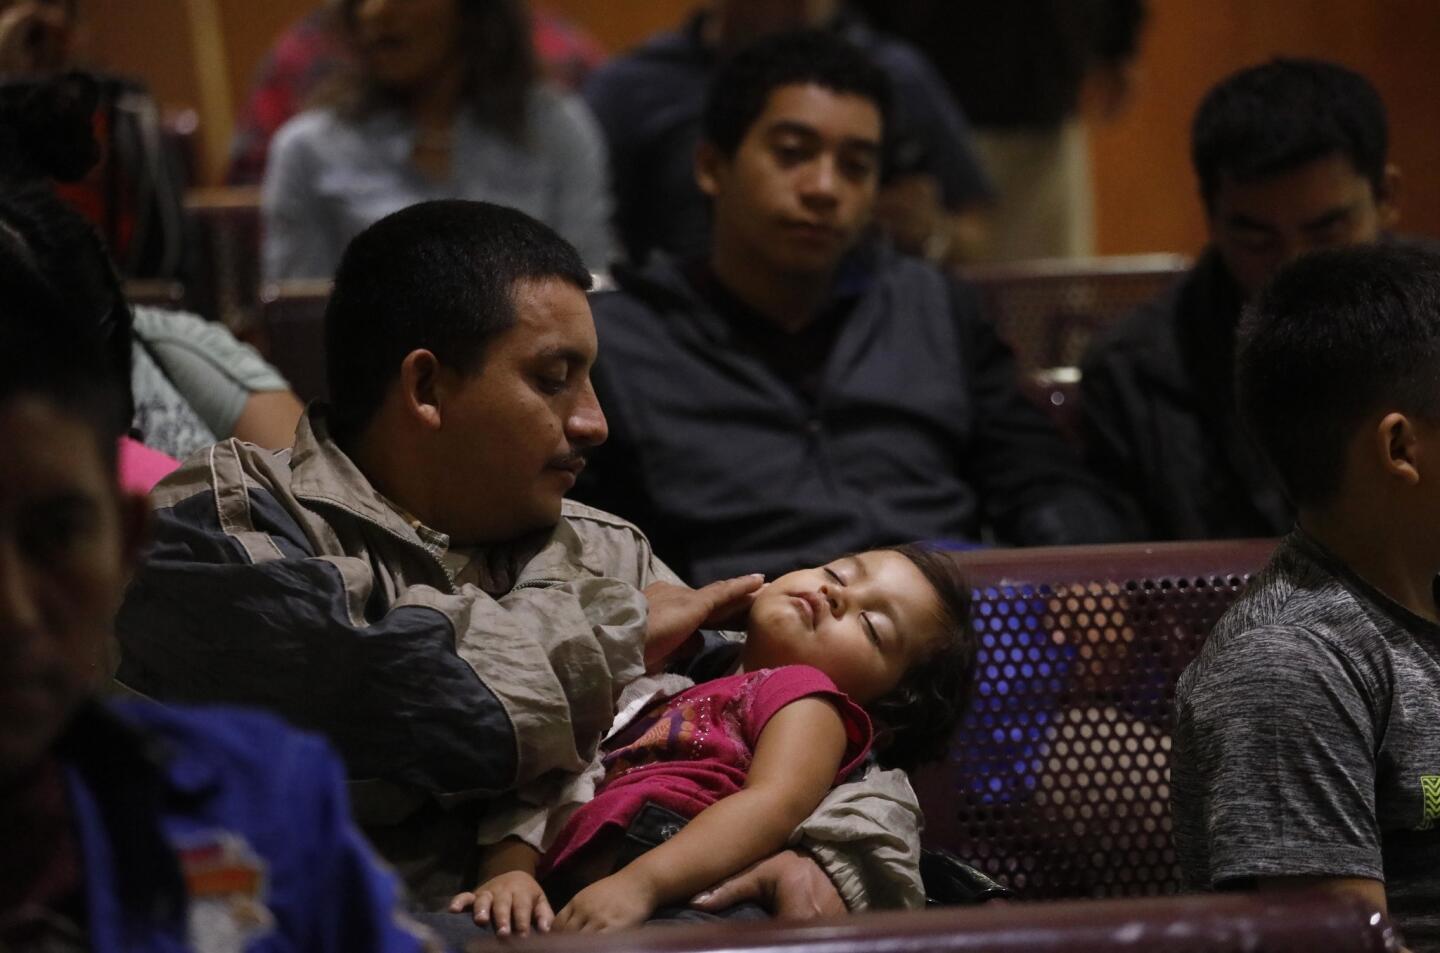 MCALLEN, TX - APRIL 3, 2019 - - Eulogio Erazo Varela, 28, from Honduras, comforts his ill daughter Kimberlin Erazo, 3, while joining recently released migrants who wait to catch a bus at the McAllen Central Station in McAllen, Texas on April 3, 2019. Varela was planning to travel to Memphis, Tenn. to stay with a friend. Migrants, recently released from custody, travel by bus or airplane to stay with relatives and friends in the United States. Volunteers from Angry Tias and Abuelas, Catholic Charities, and local churches find new challenges with the expected release in the coming days of some 5,600 immigrants in McAllen, Brownsville and Harlingen, Texas. (Genaro Molina/Los Angeles Times)